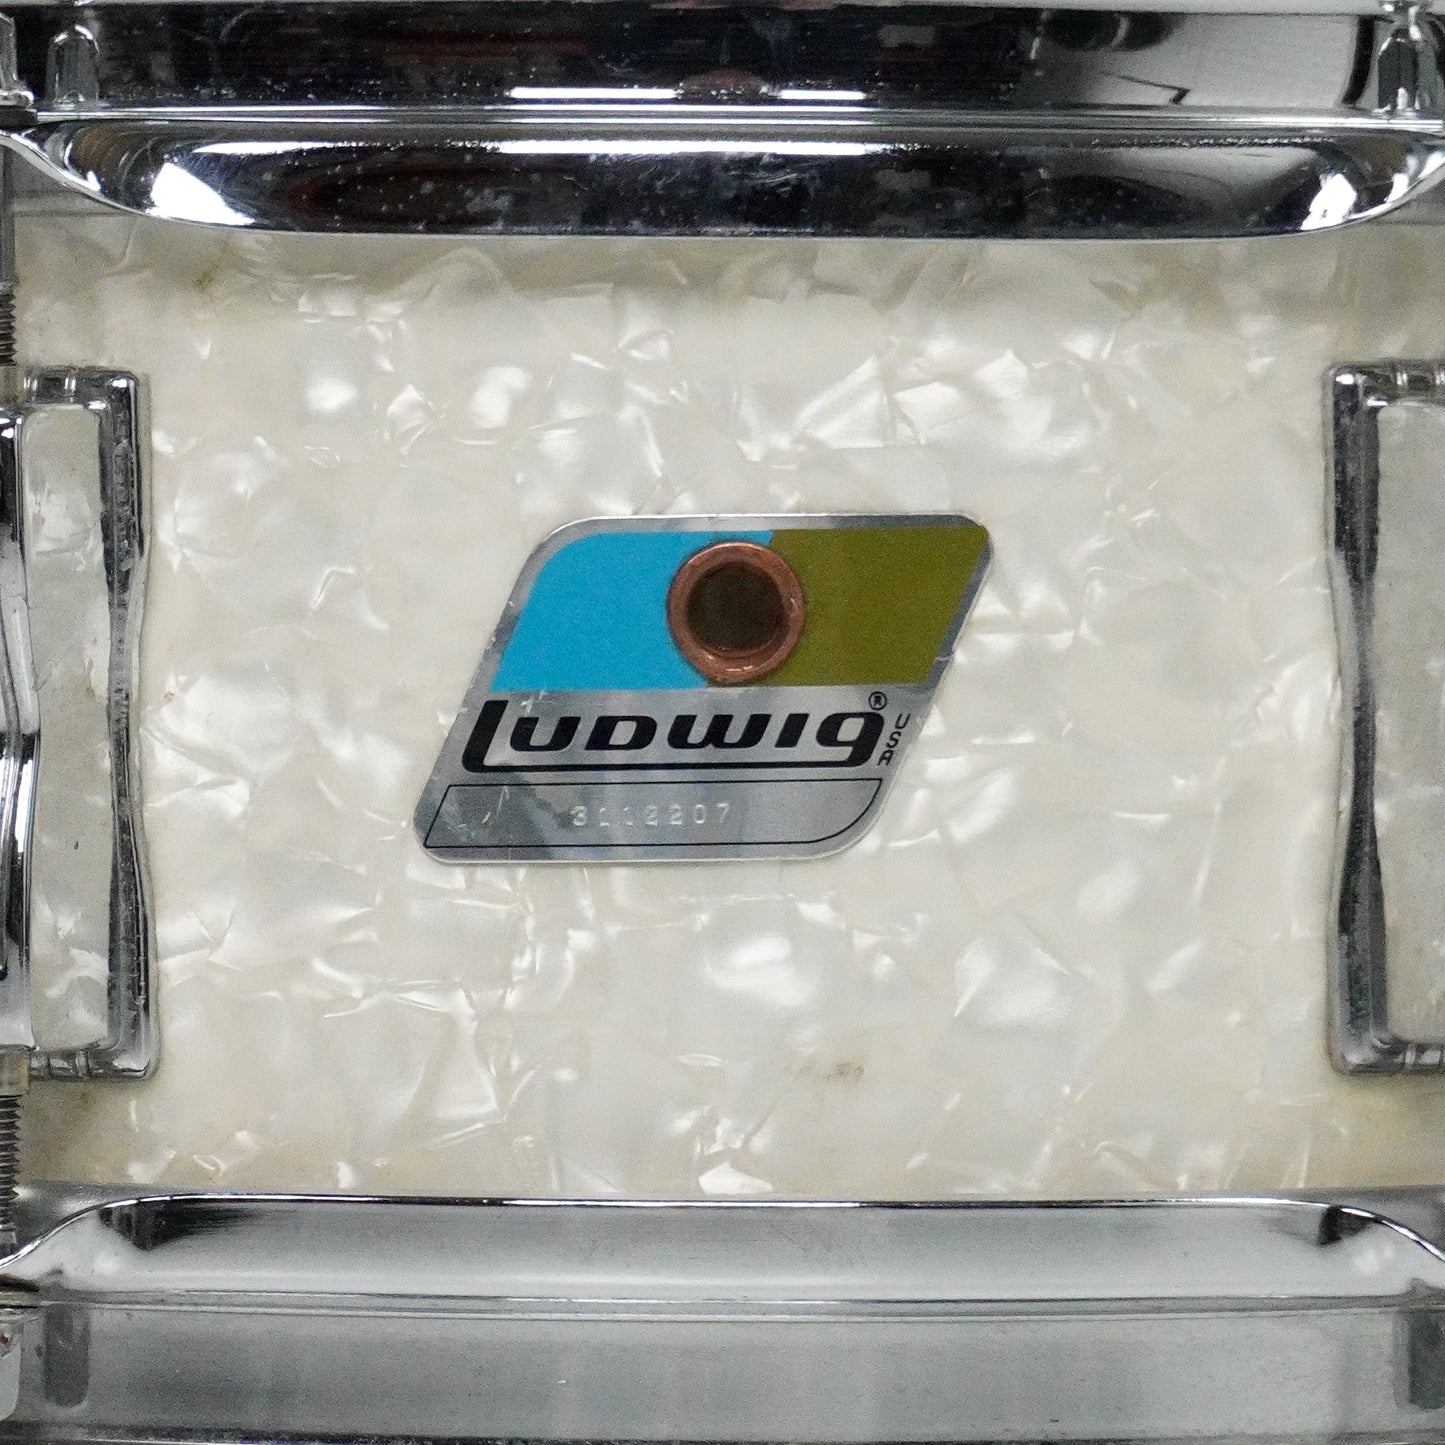 Ludwig 14” x 5” Standard Snare Drum in White Marine Pearl